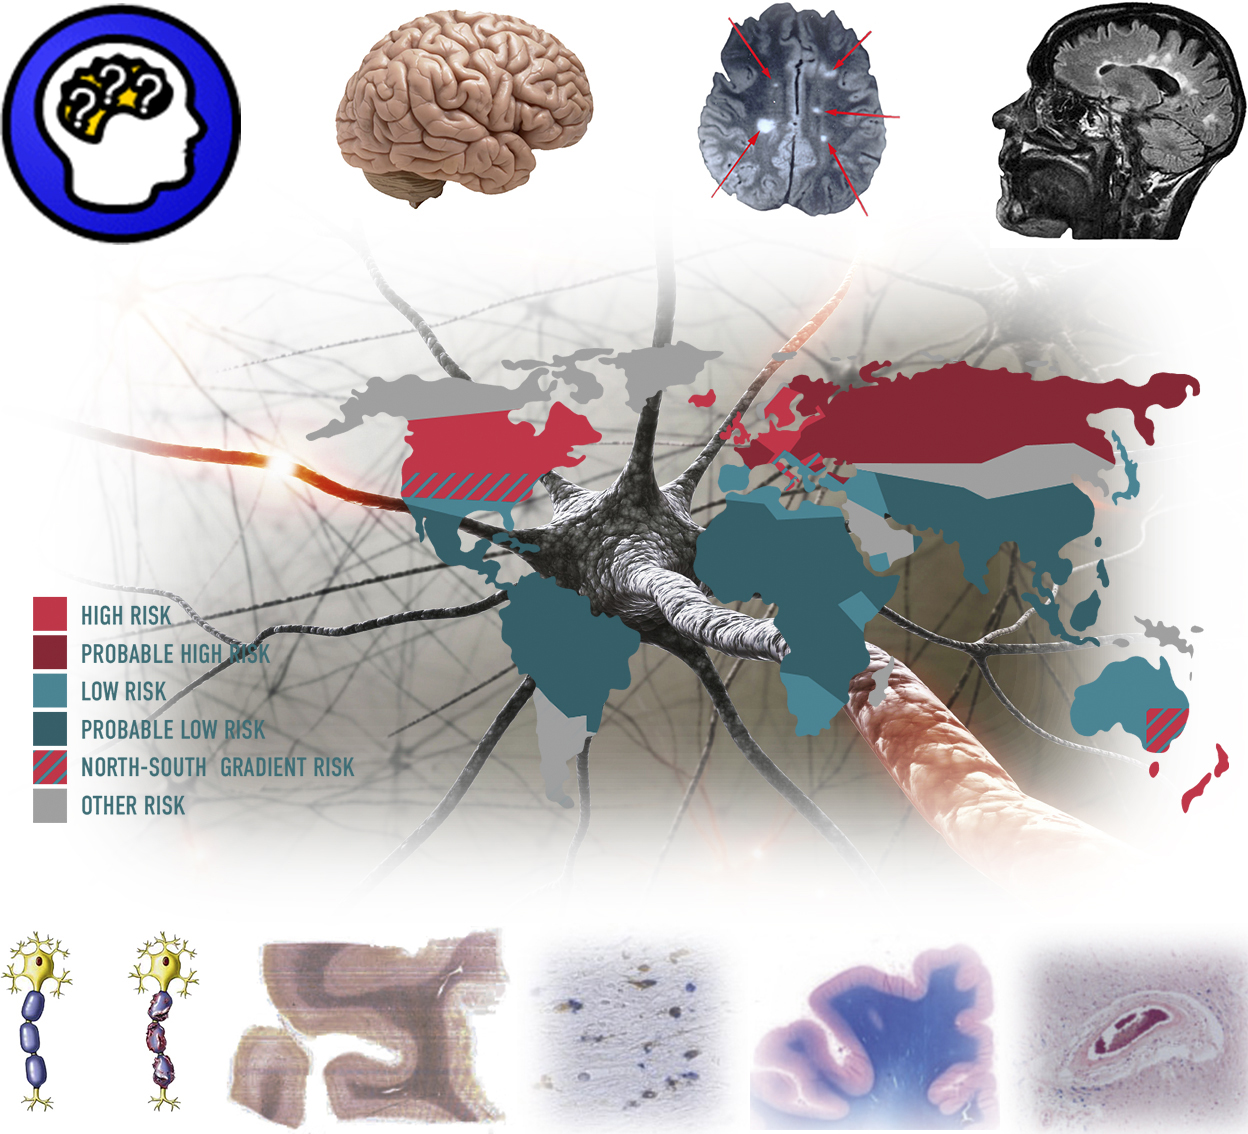 Multimodal assessment of neuroinflammation and diseases of white matter